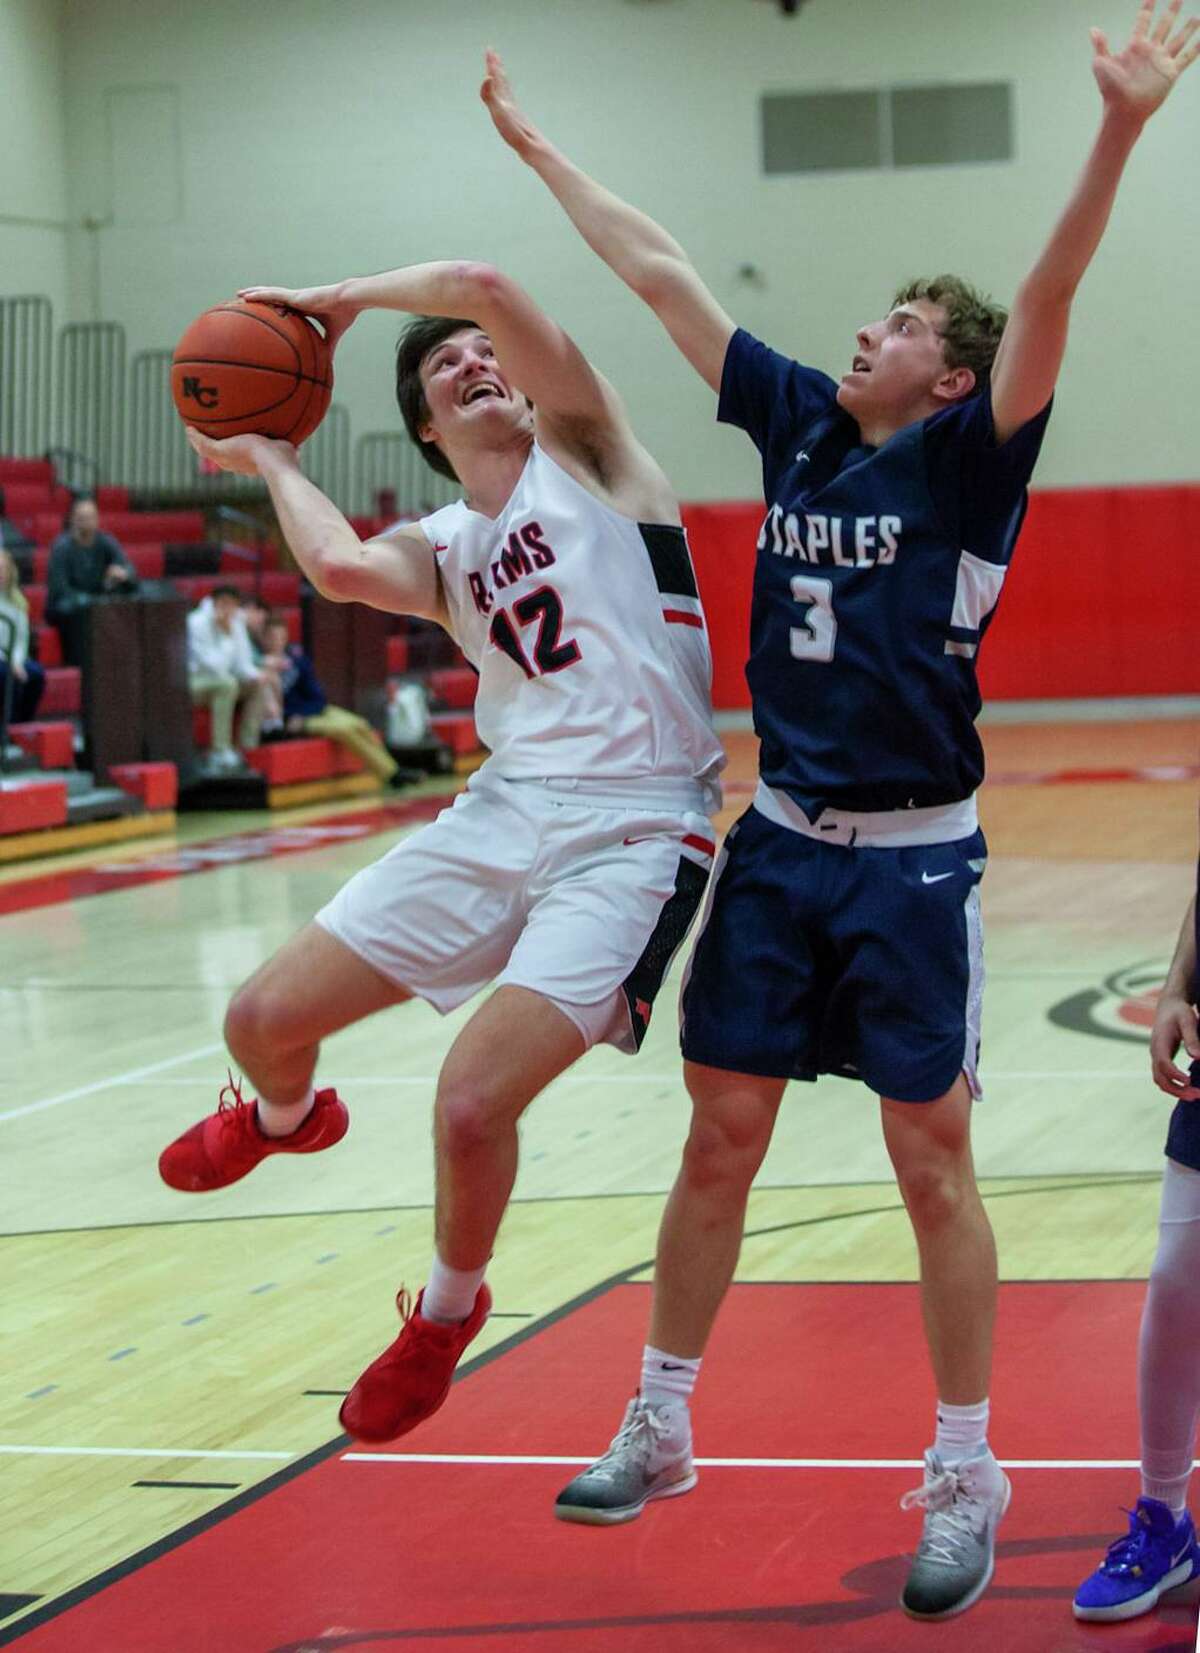 New Canaan's Christian Sweeney (12) goes up for a shot, while Staples' Derek Sale (3) defends during a boys basketball game at New Canaan High School on Monday, Feb. 24, 2020.